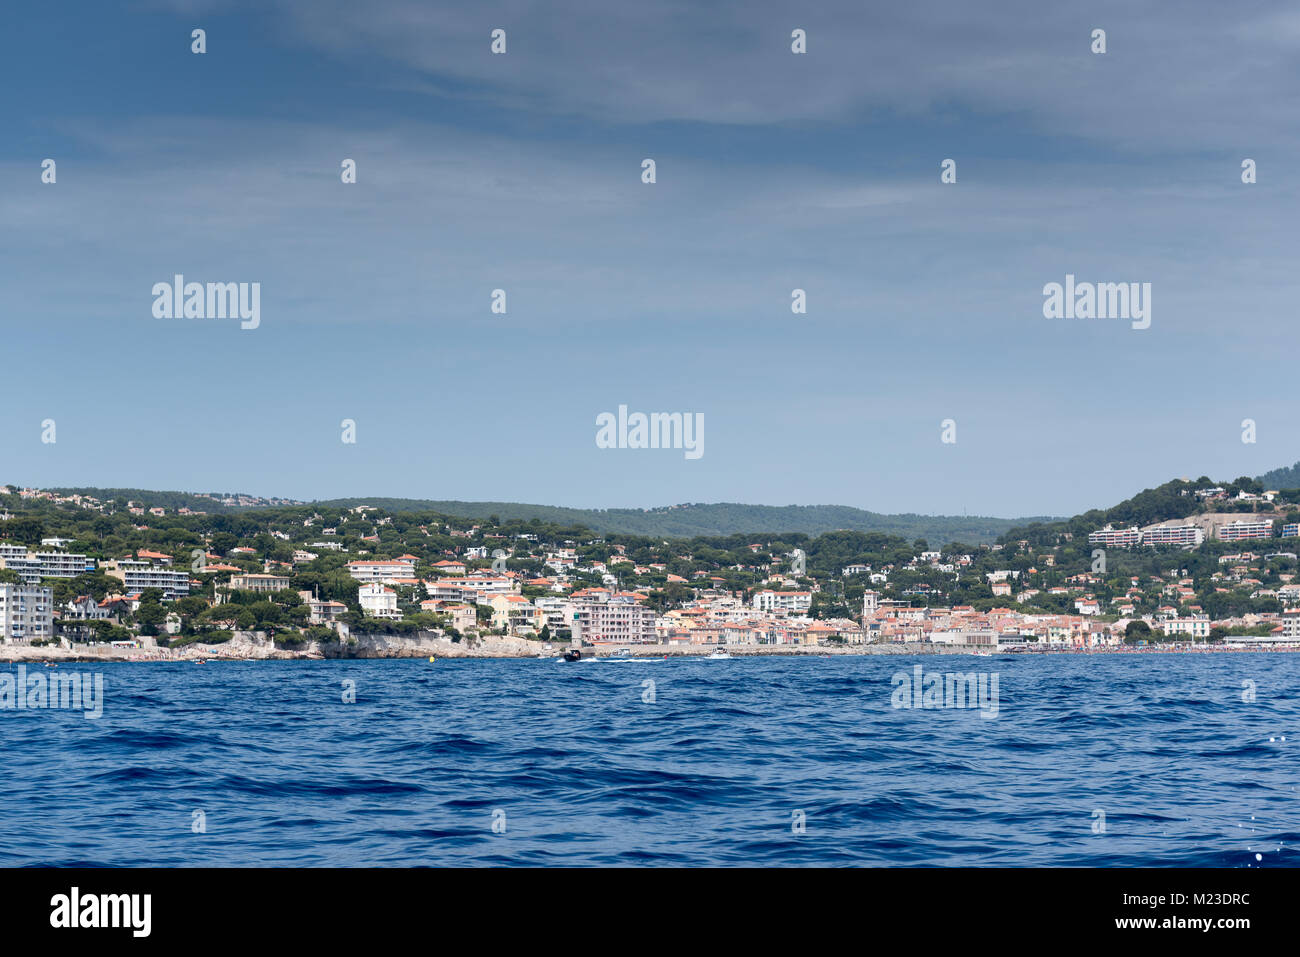 City of Cassis seen from the sea, France, summer Stock Photo